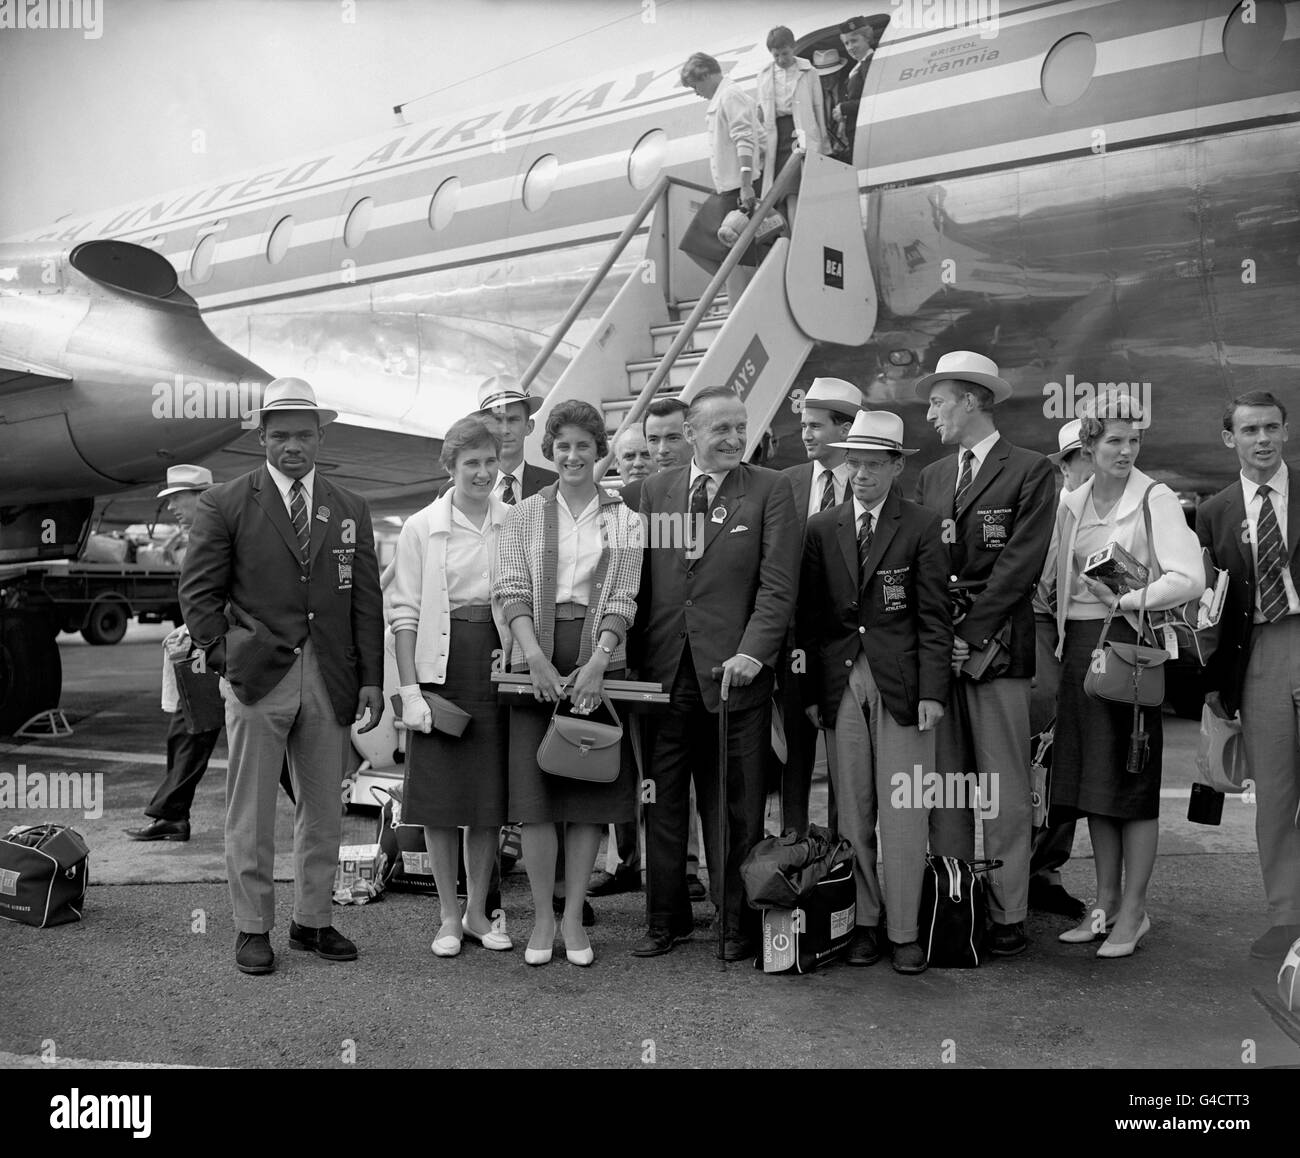 (L-R) Some of the British medalists upon their arrival at London Airport: weightlifter Louis Martin (bronze), high jumper Dorothy Shirley (silver), 100m runner Dorothy Hyman (silver), Lord Burghley, The 6th Marquis of Exeter, 50km walker Don Thompson (gold), a fencer and 80m hurdler Carol Quinton (silver) Stock Photo